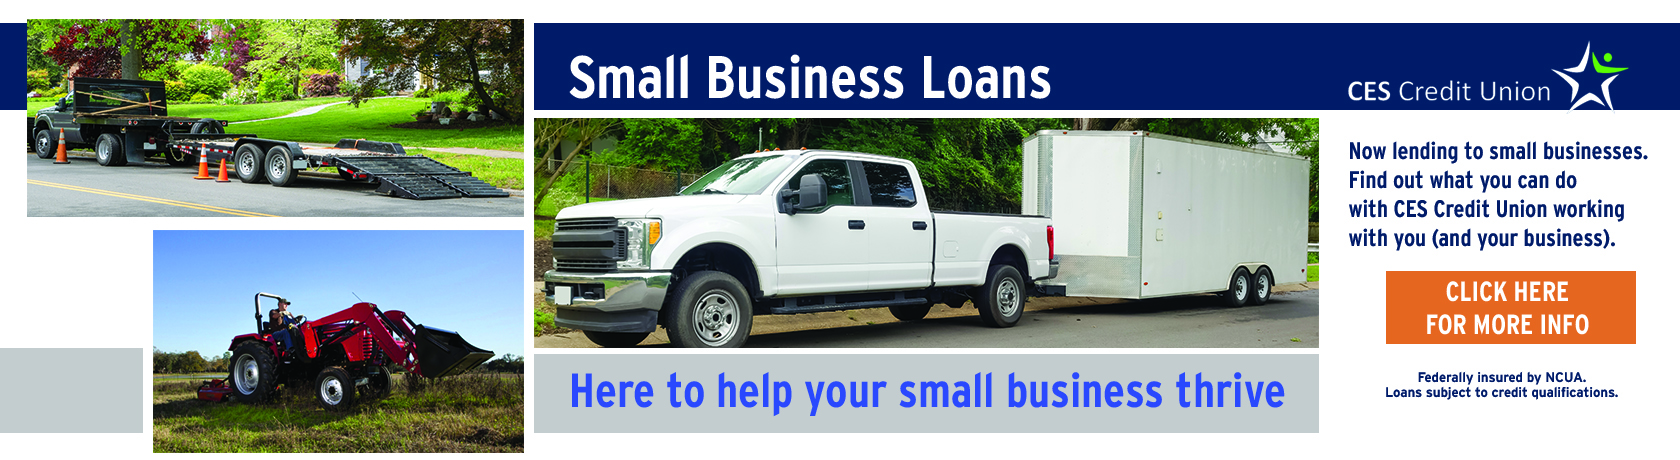 Small Business Loans at CES Credit Union. Now lending to small businesses. Find out what you can do with CES Credit Union working for you. Click here for more information. Federally insured by NCUA. Loans subject to credit qualifications. (Photo of truck with trailer, truck with flatbed trailer. small utility tractor) 